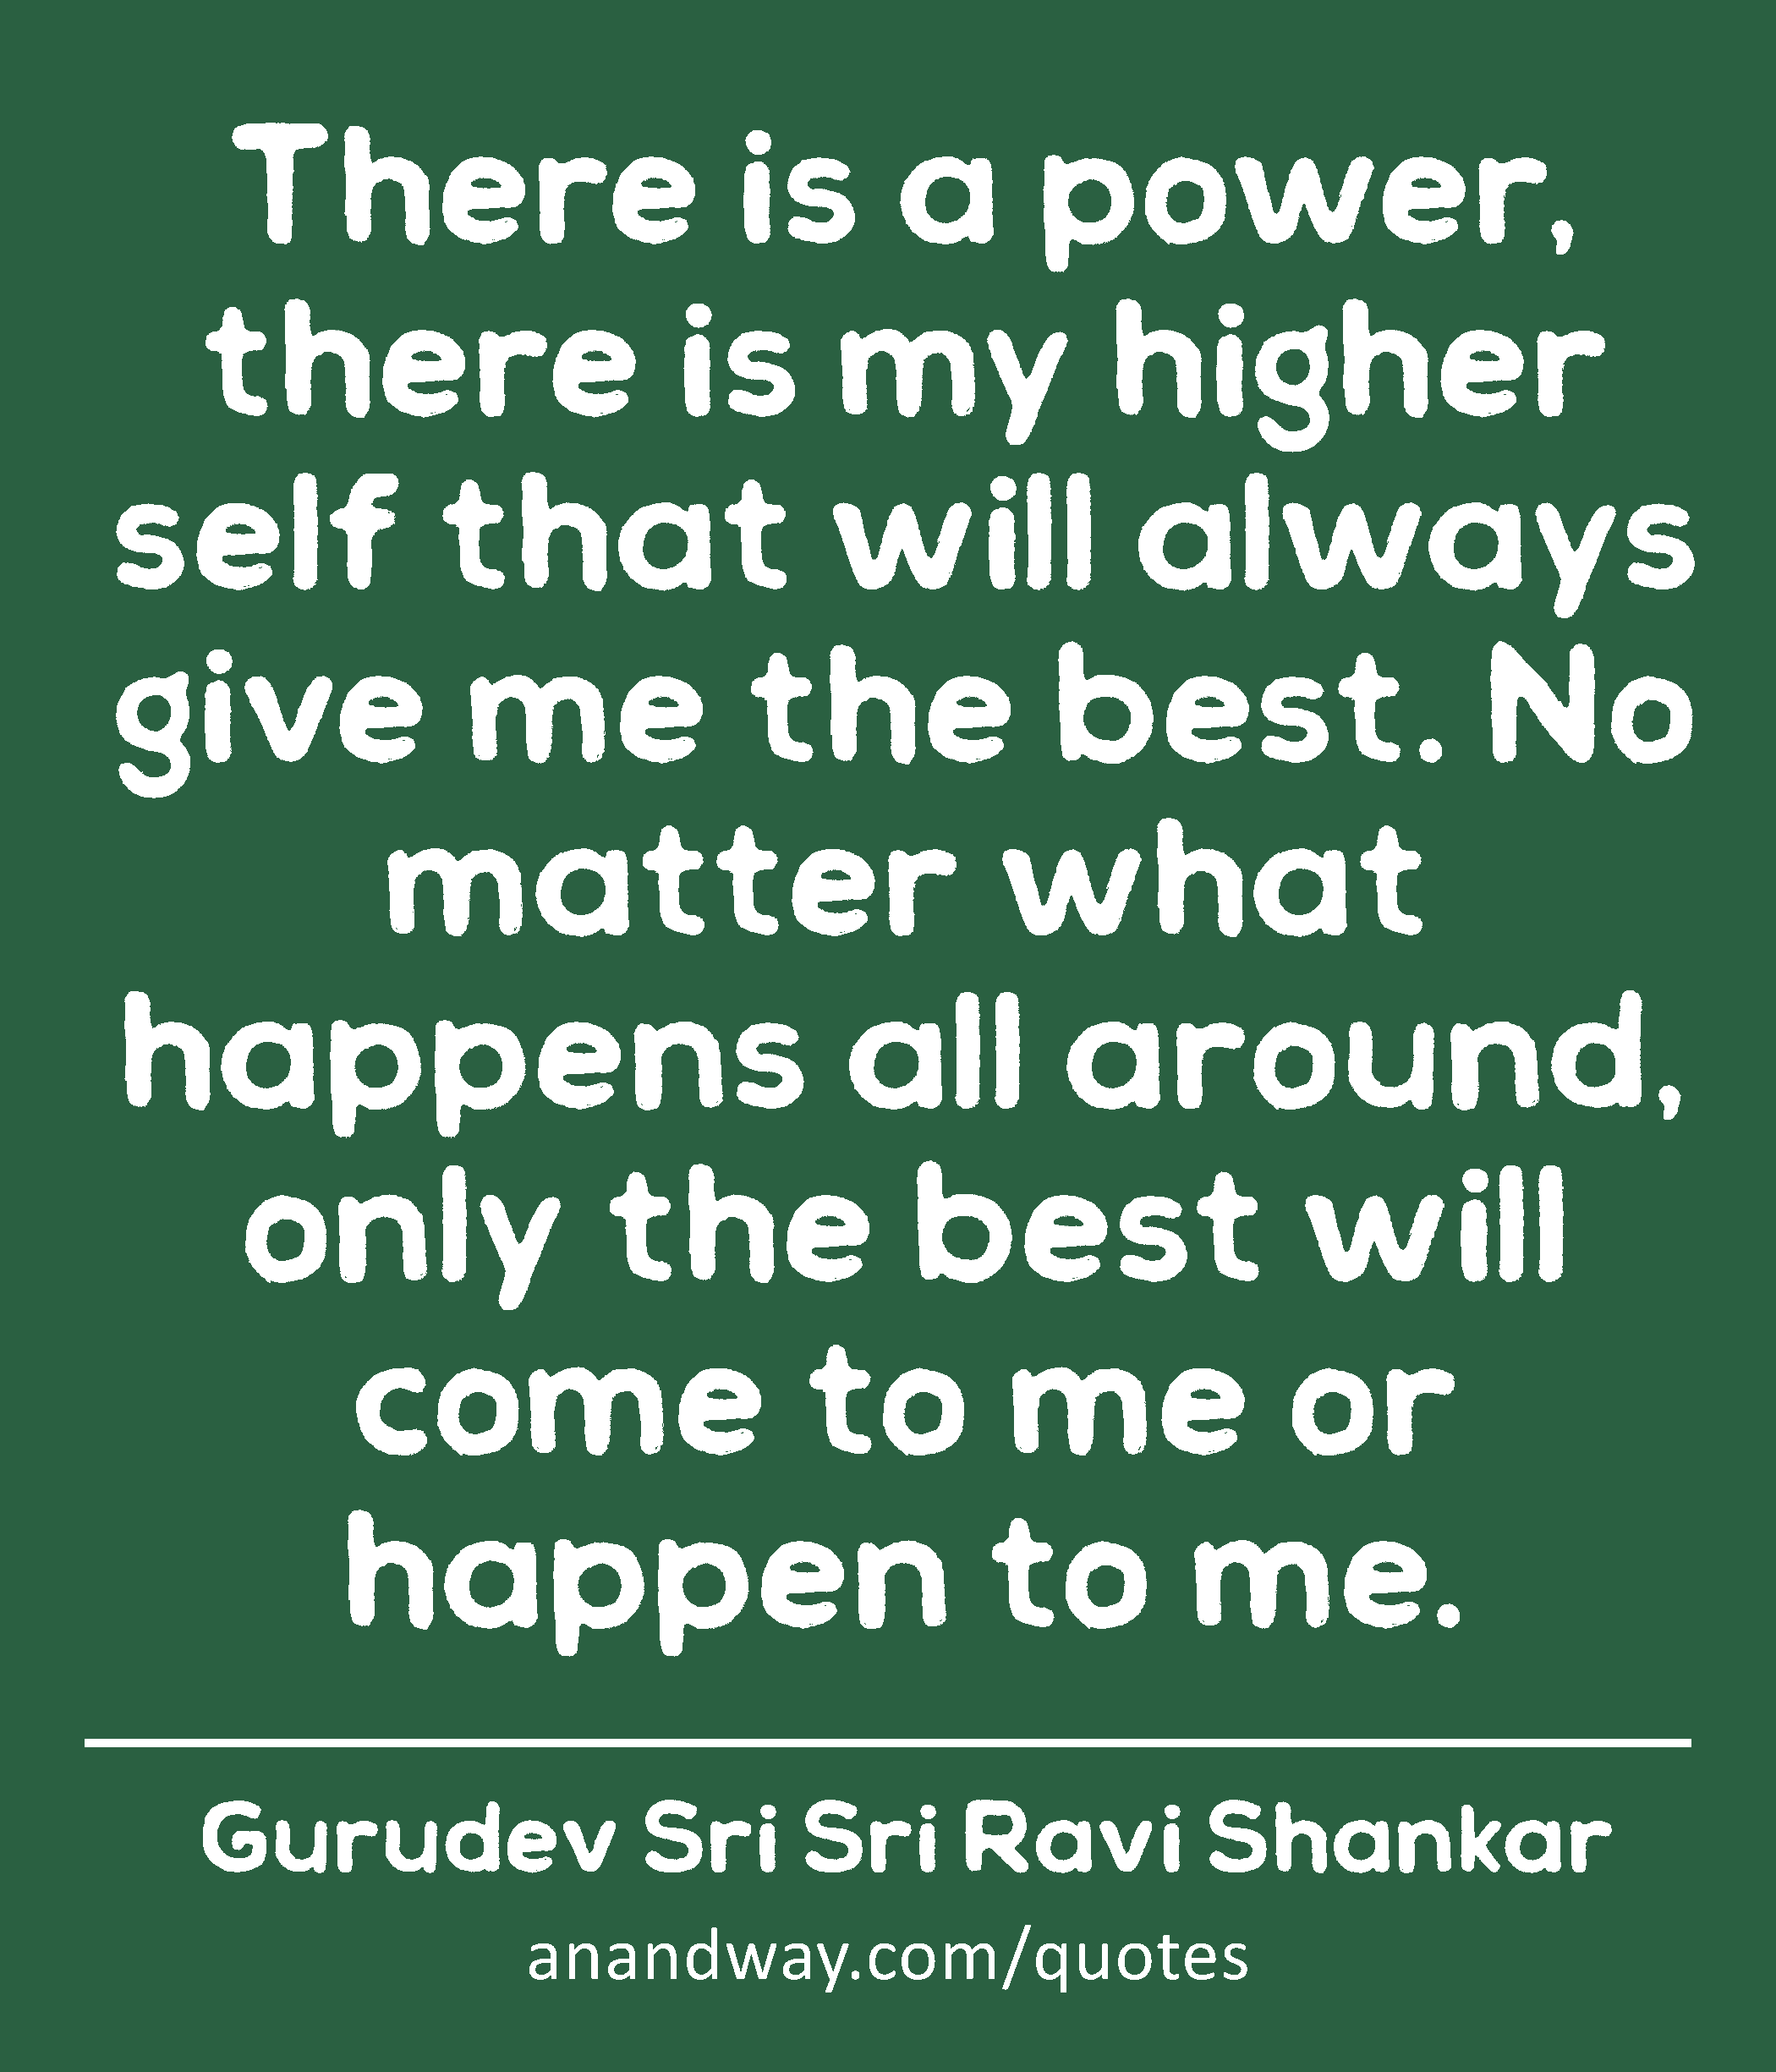 There is a power, there is my higher self that will always give me the best. No matter what happens
 -Gurudev Sri Sri Ravi Shankar